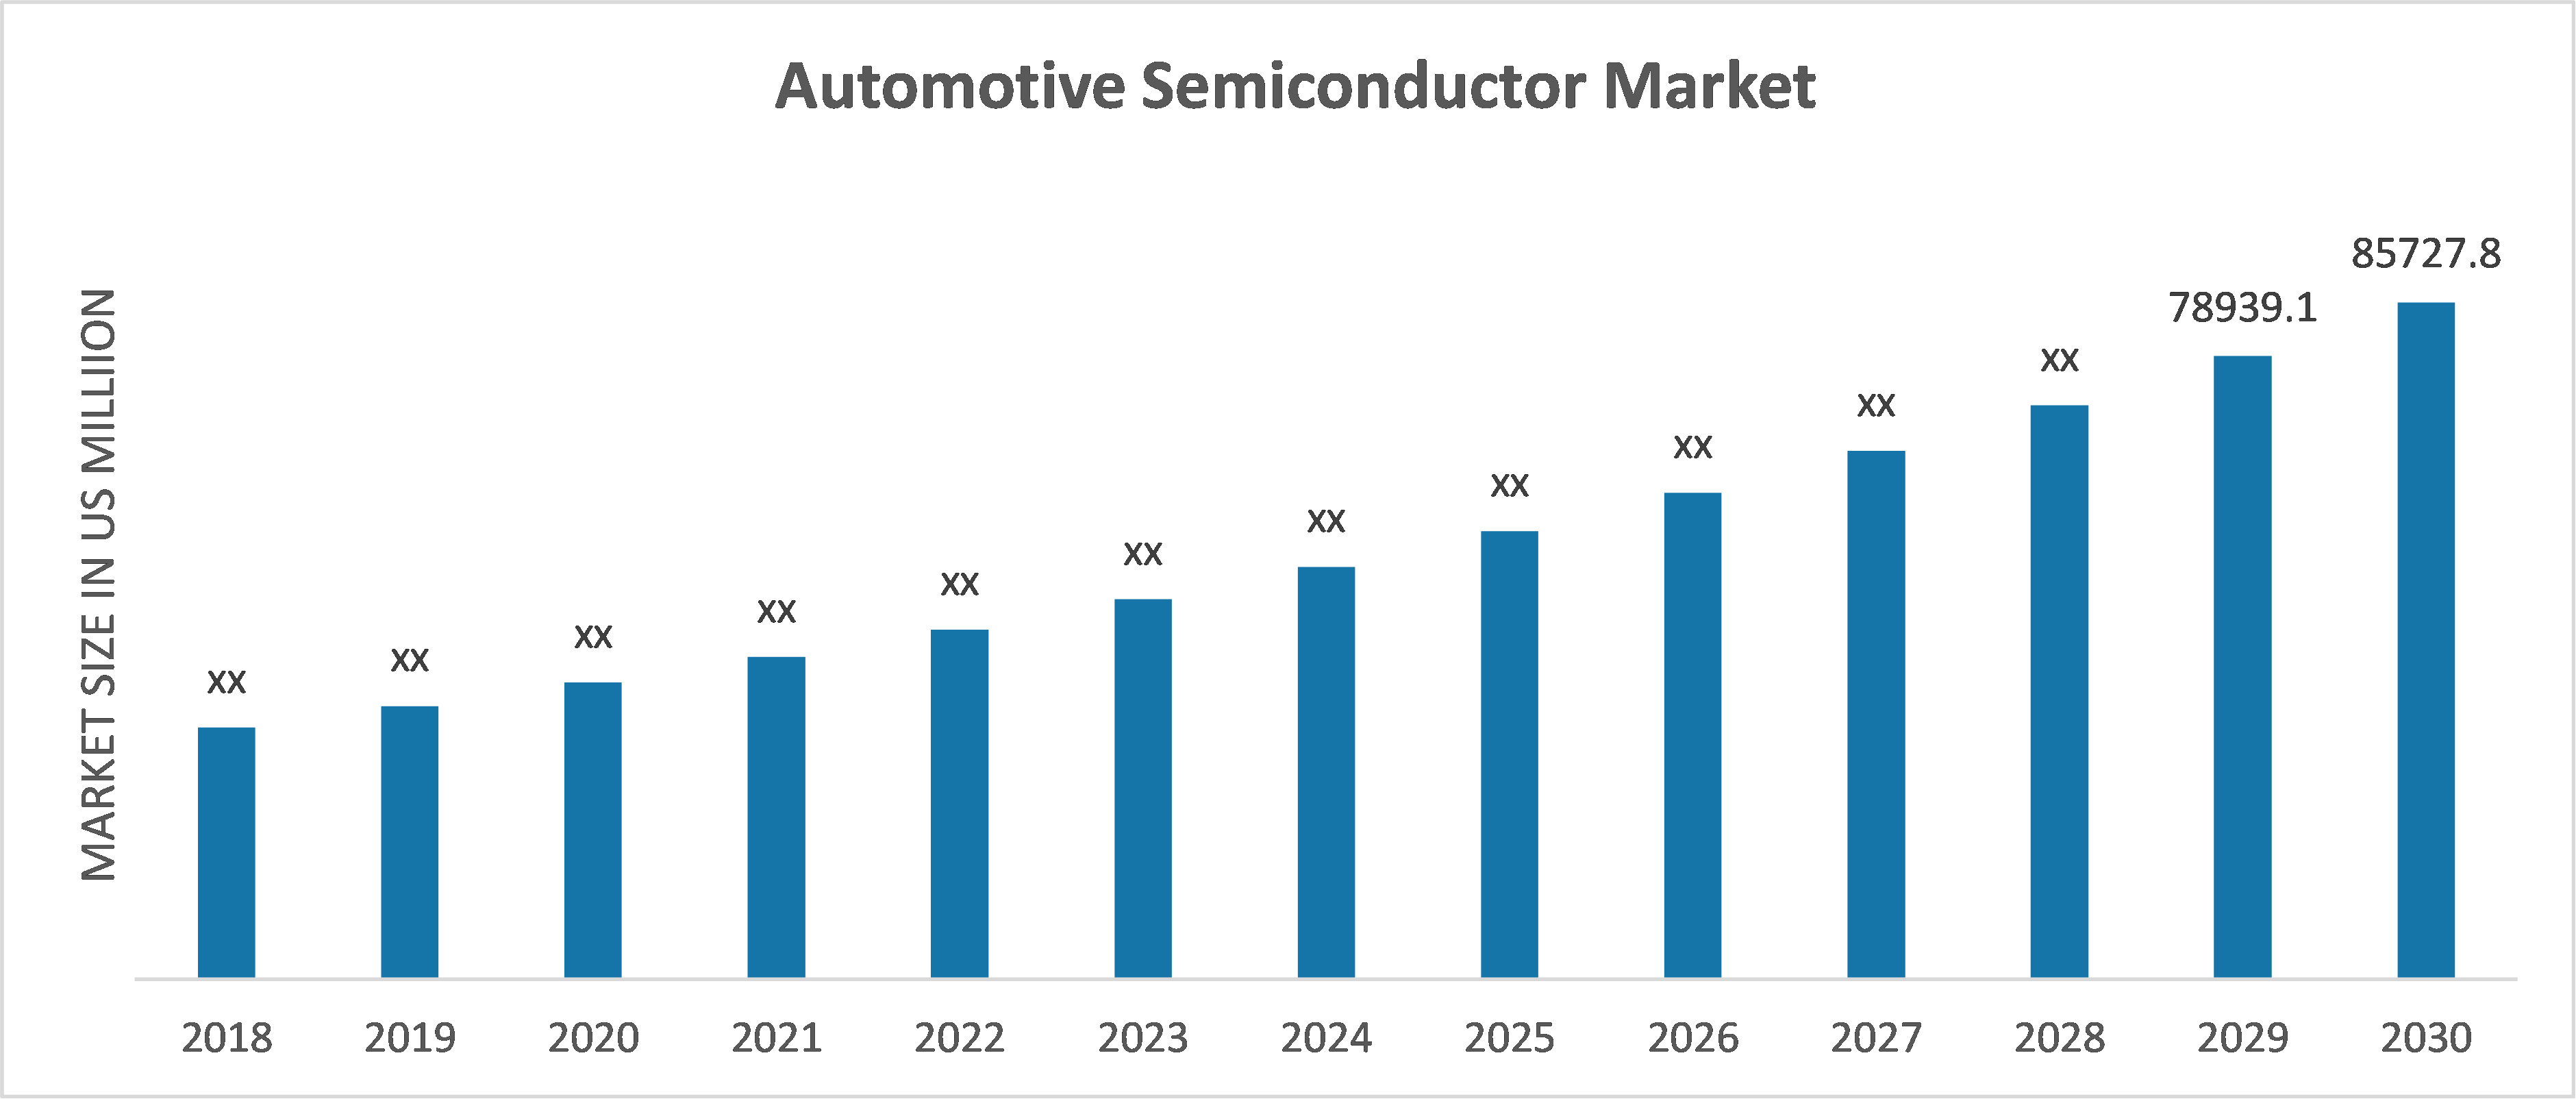 Global Automotive Semiconductor Market Overview